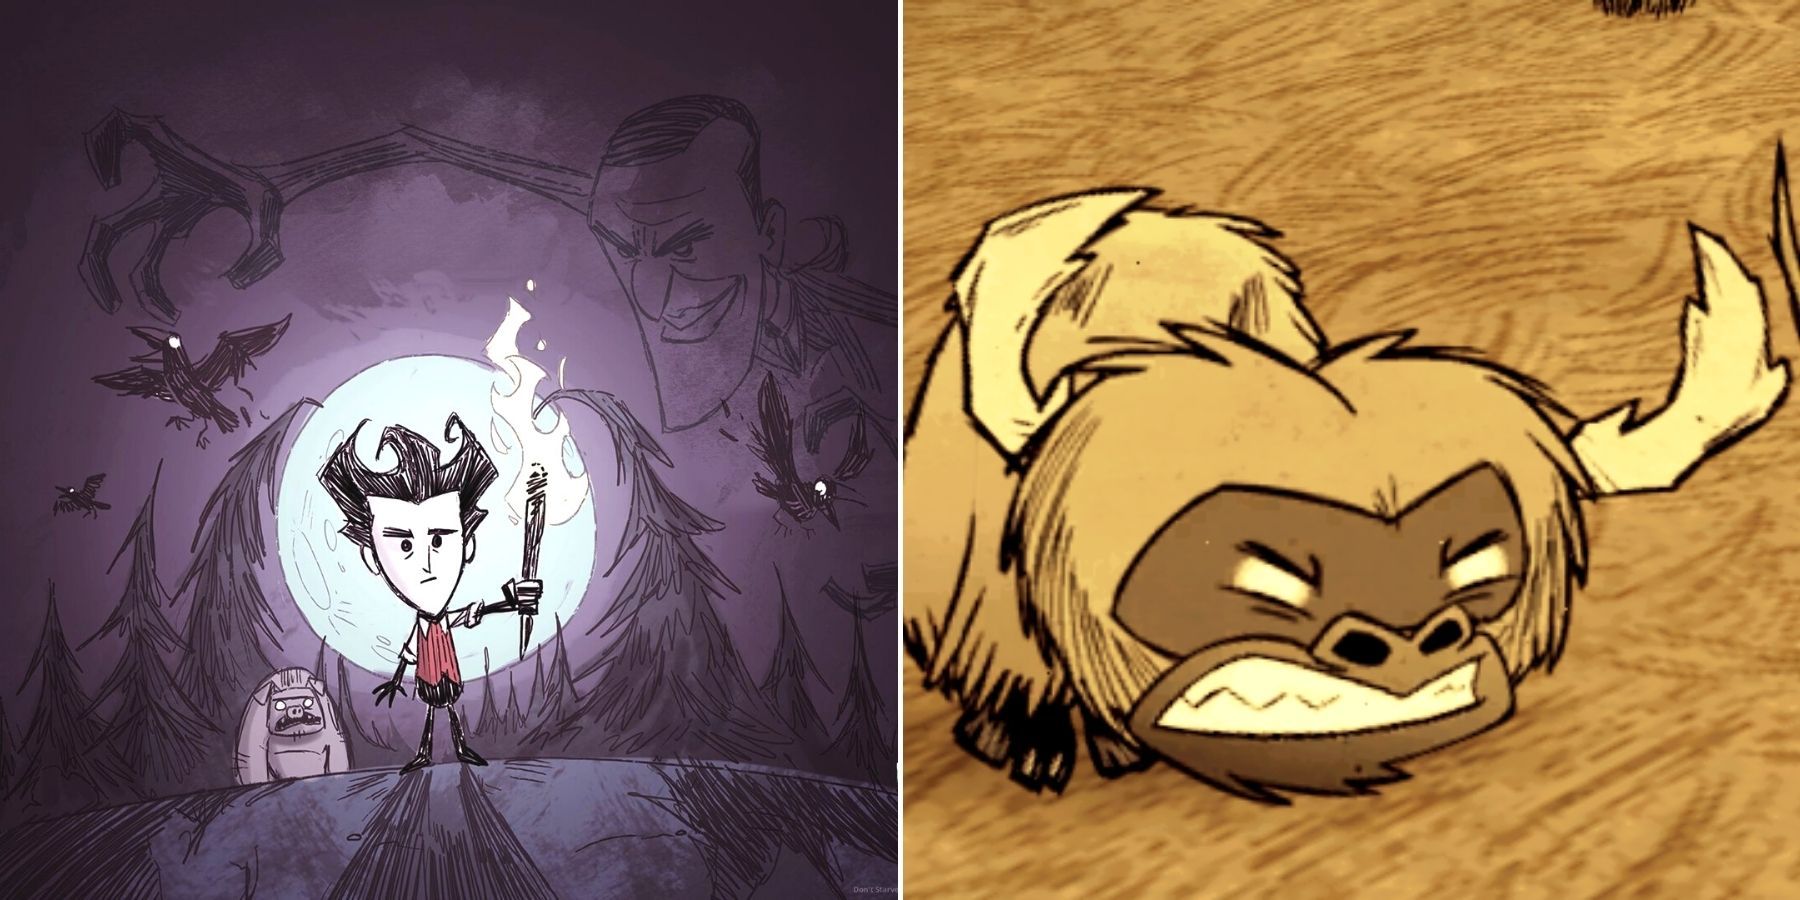 Don't Starve: Wilson in the moonlight - An angry Beefalo